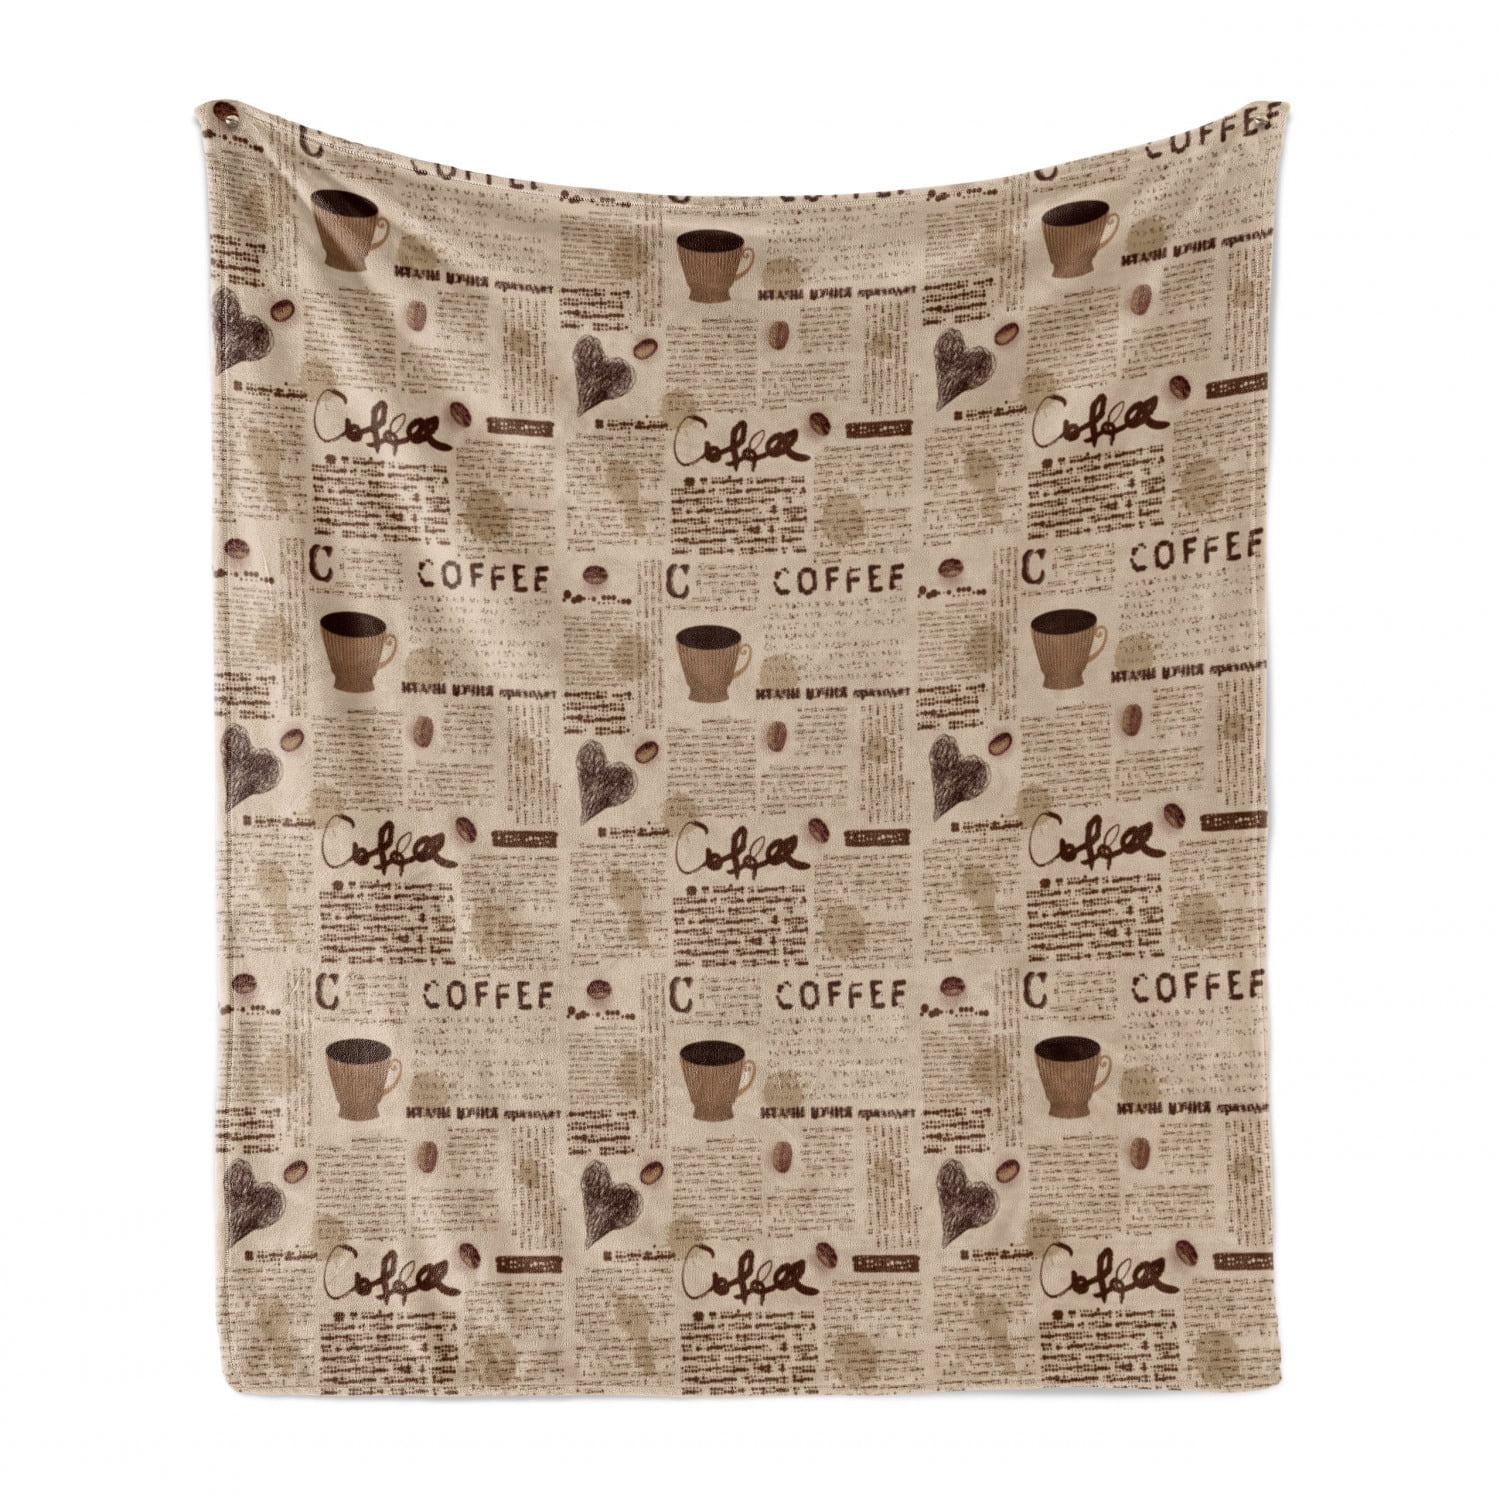 Newspaper Nostalgic Background with Coffee Cups and Writing Art Print Sand Brown and Umber Ambesonne Modern Soft Flannel Fleece Throw Blanket 50 x 60 Cozy Plush for Indoor and Outdoor Use 